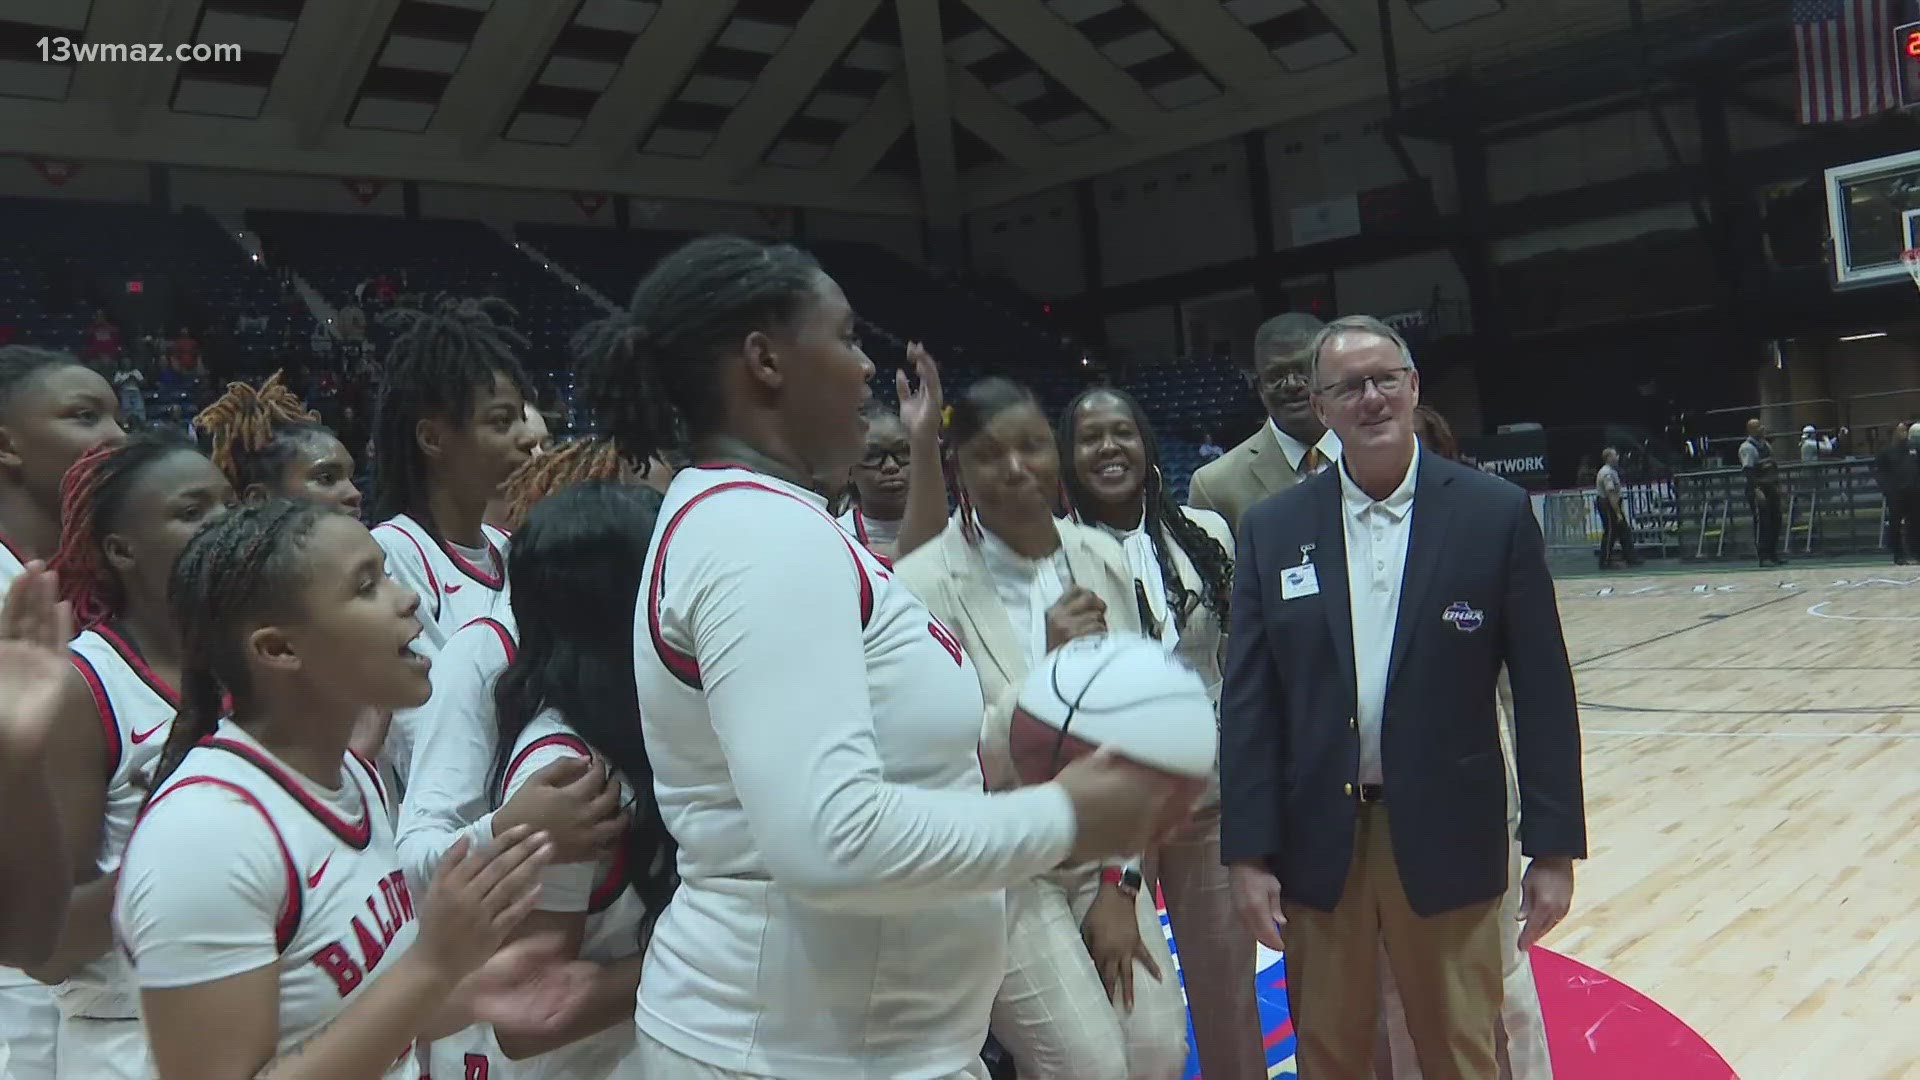 The team nearly clinched the title last season, but at the championship game at the Macon Coliseum, they managed to bring the trophy back to Baldwin County.